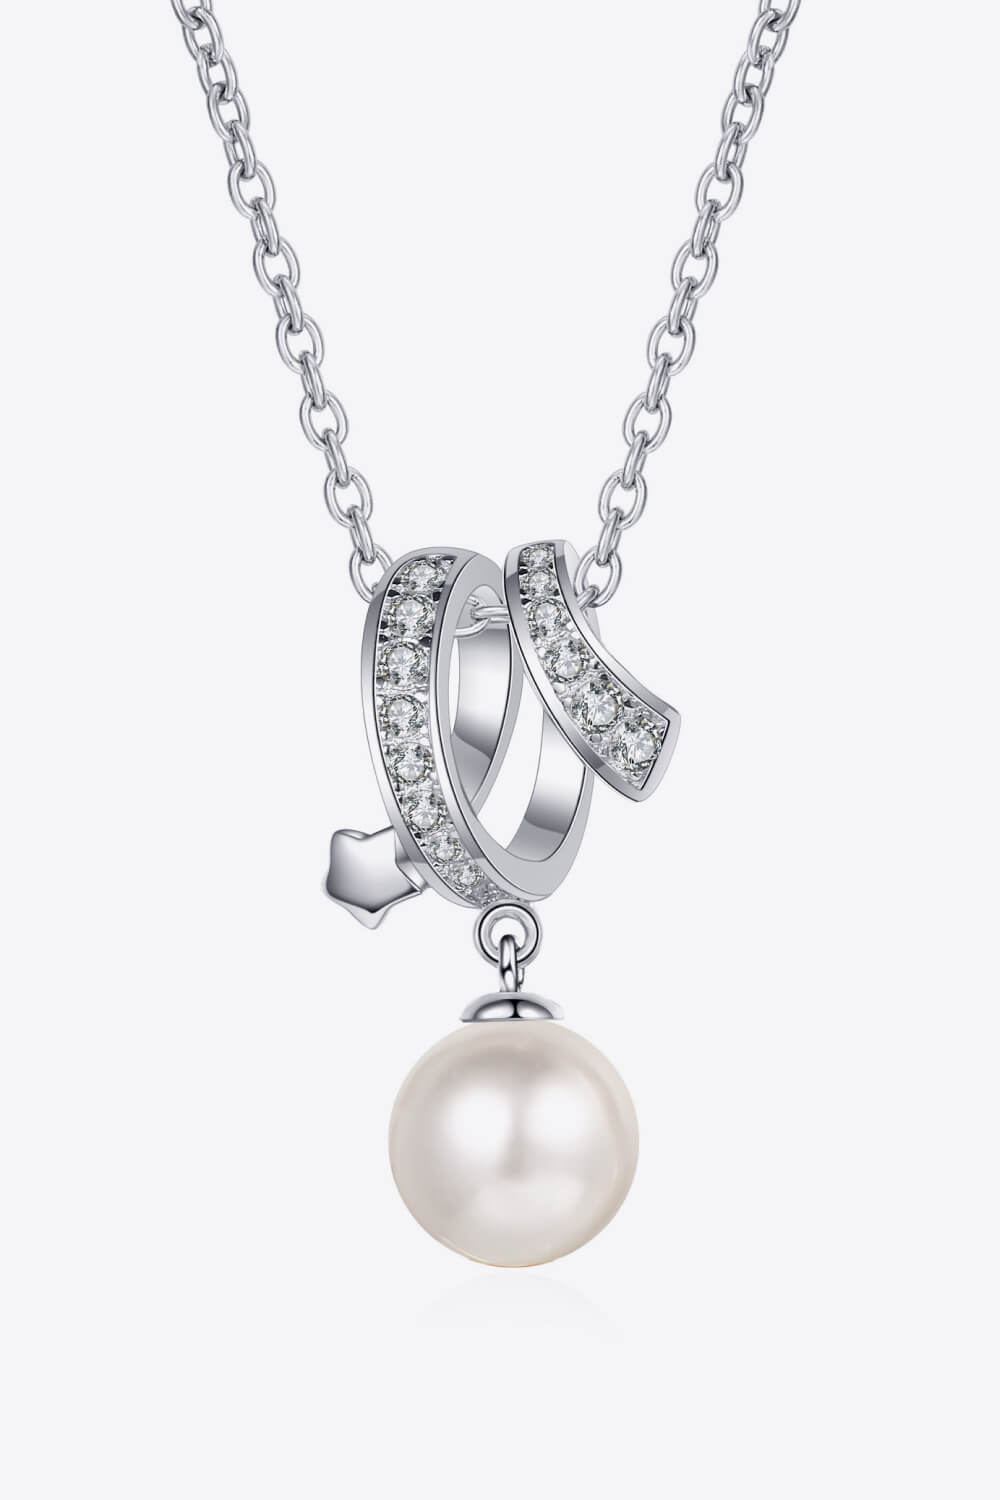 Give You A Chance Pearl Pendant Chain Necklace Ti Amo I love you